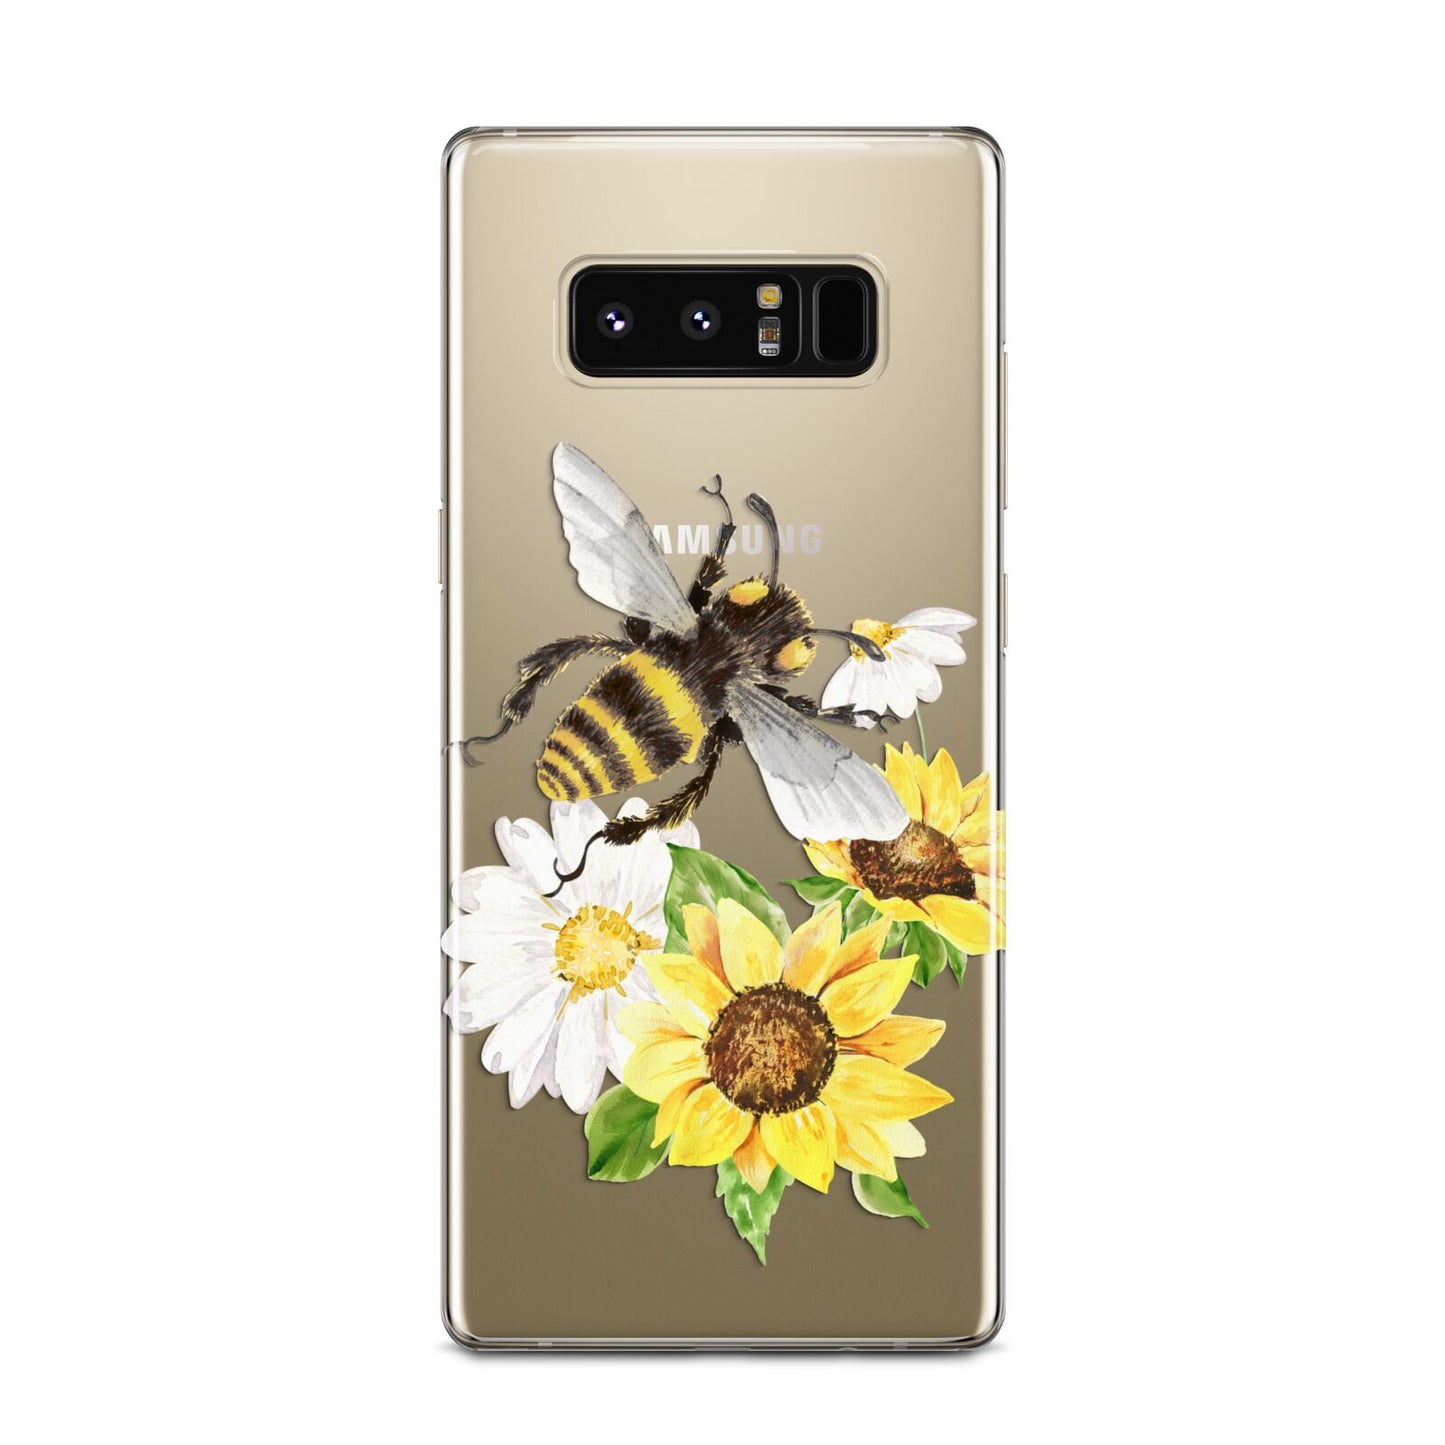 Watercolour Bee and Sunflowers Samsung Galaxy Note 8 Case